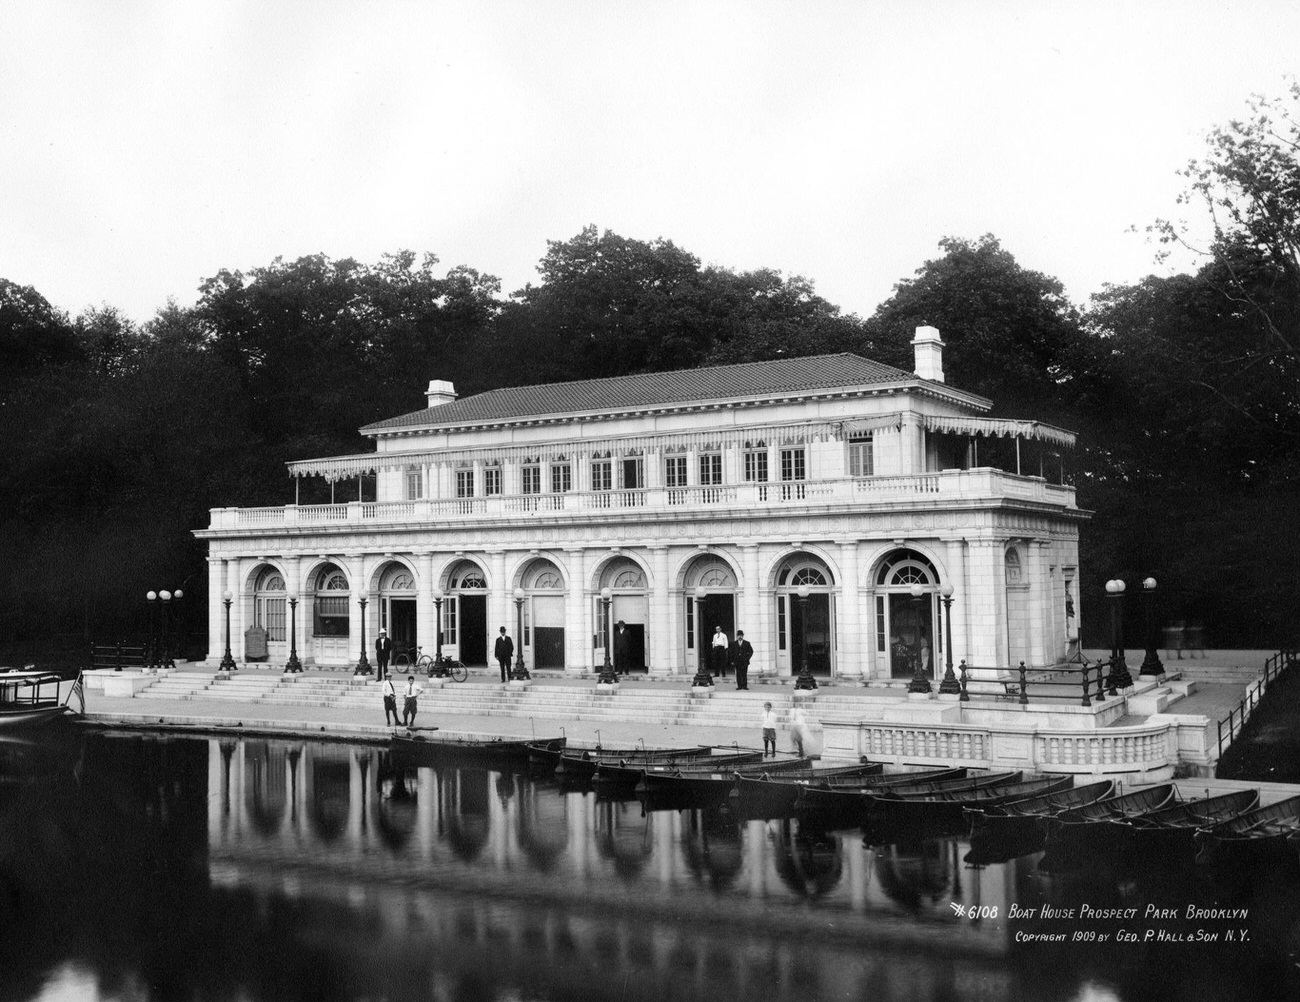 The Boathouse In Prospect Park, Brooklyn, 1909